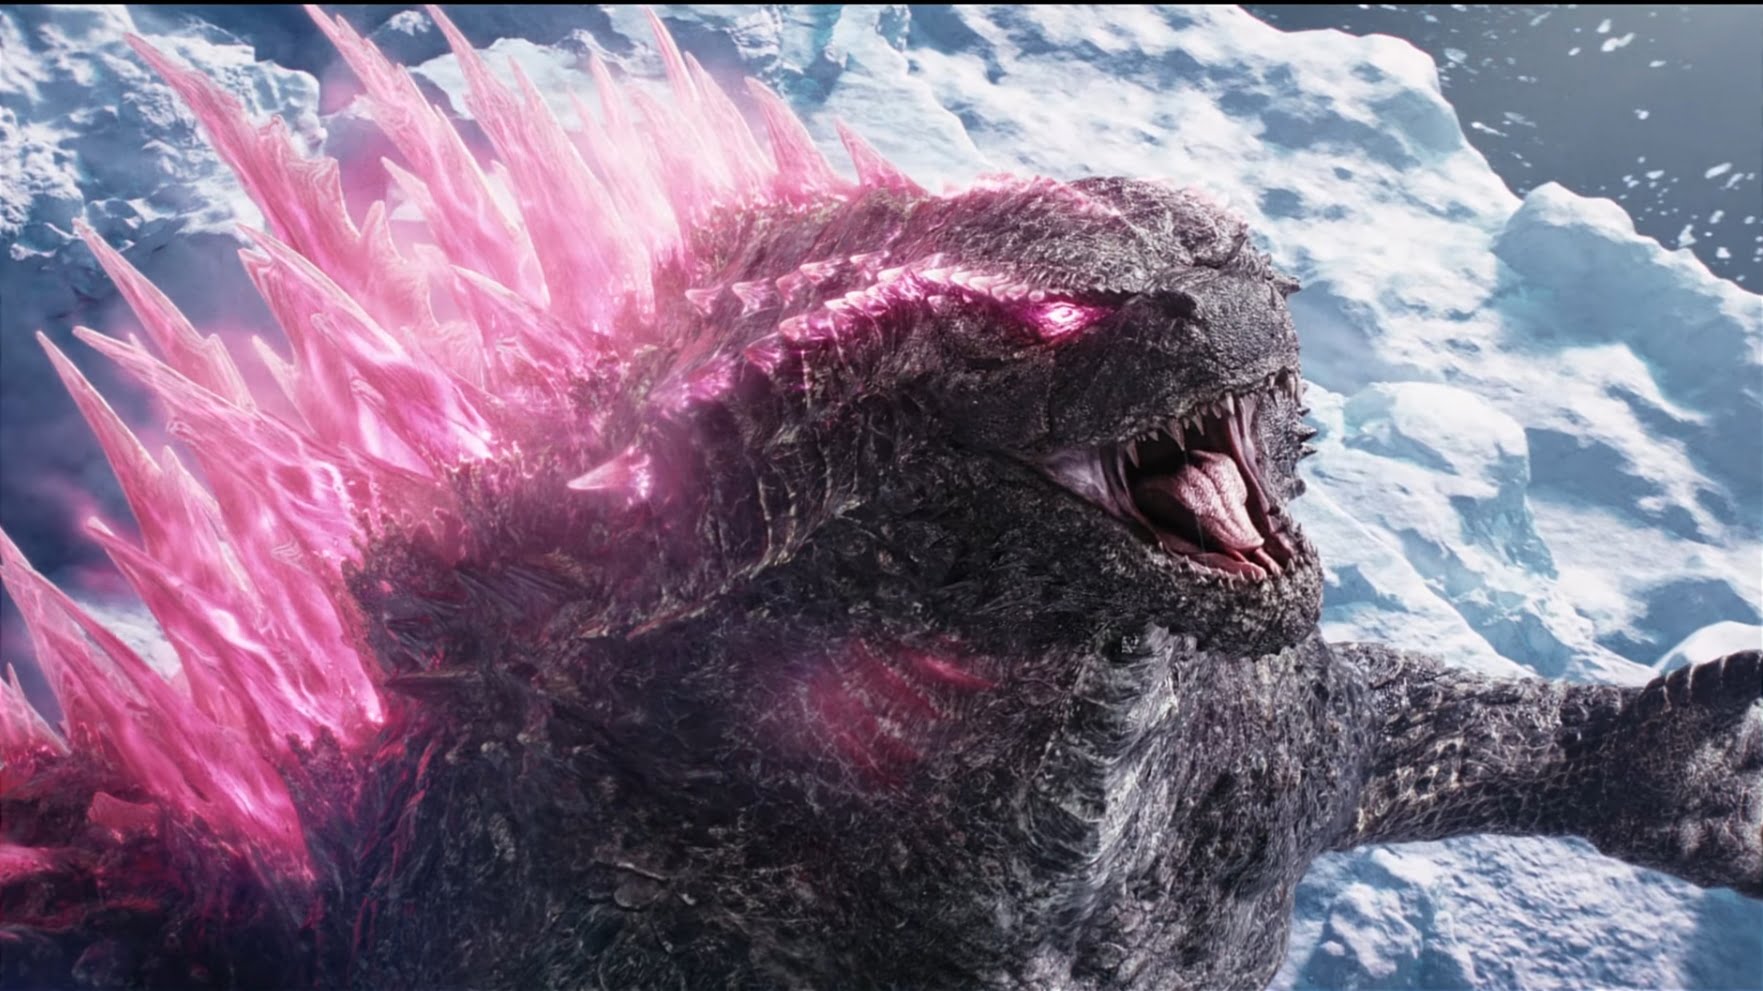 New Trailer of "Godzilla x Kong: The New Empire" Drops! Releasing on March 15, 2024